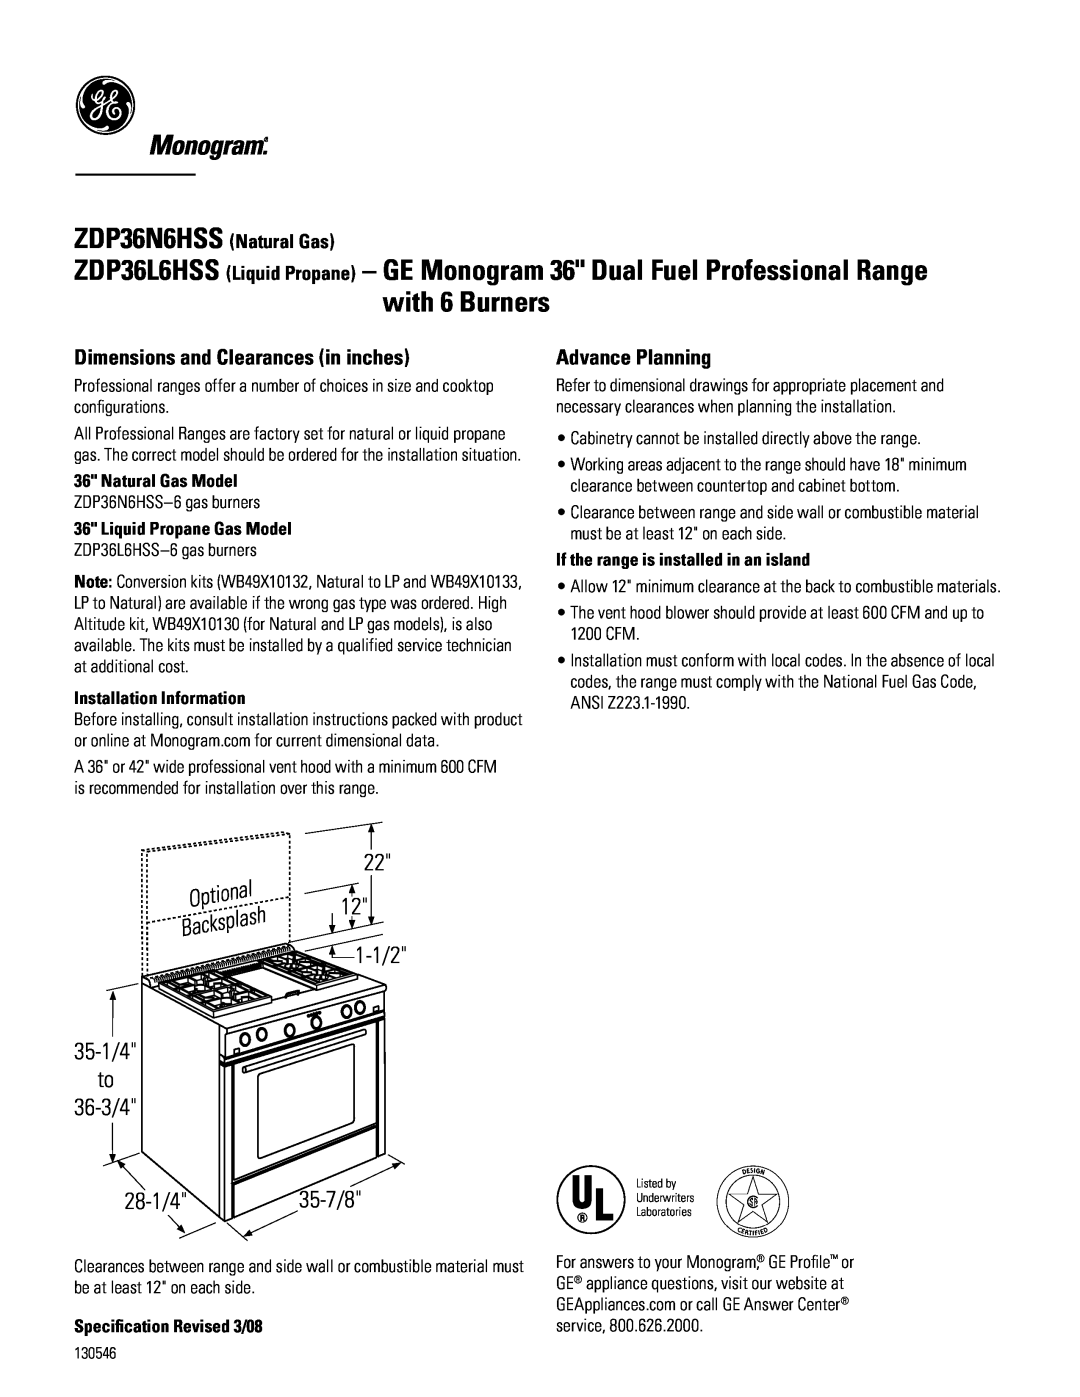 GE Monogram zDP36L6hSS dimensions zdp36l6hss, zdp36n6hss, Dimensions and Clearances in inches, Advance Planning 